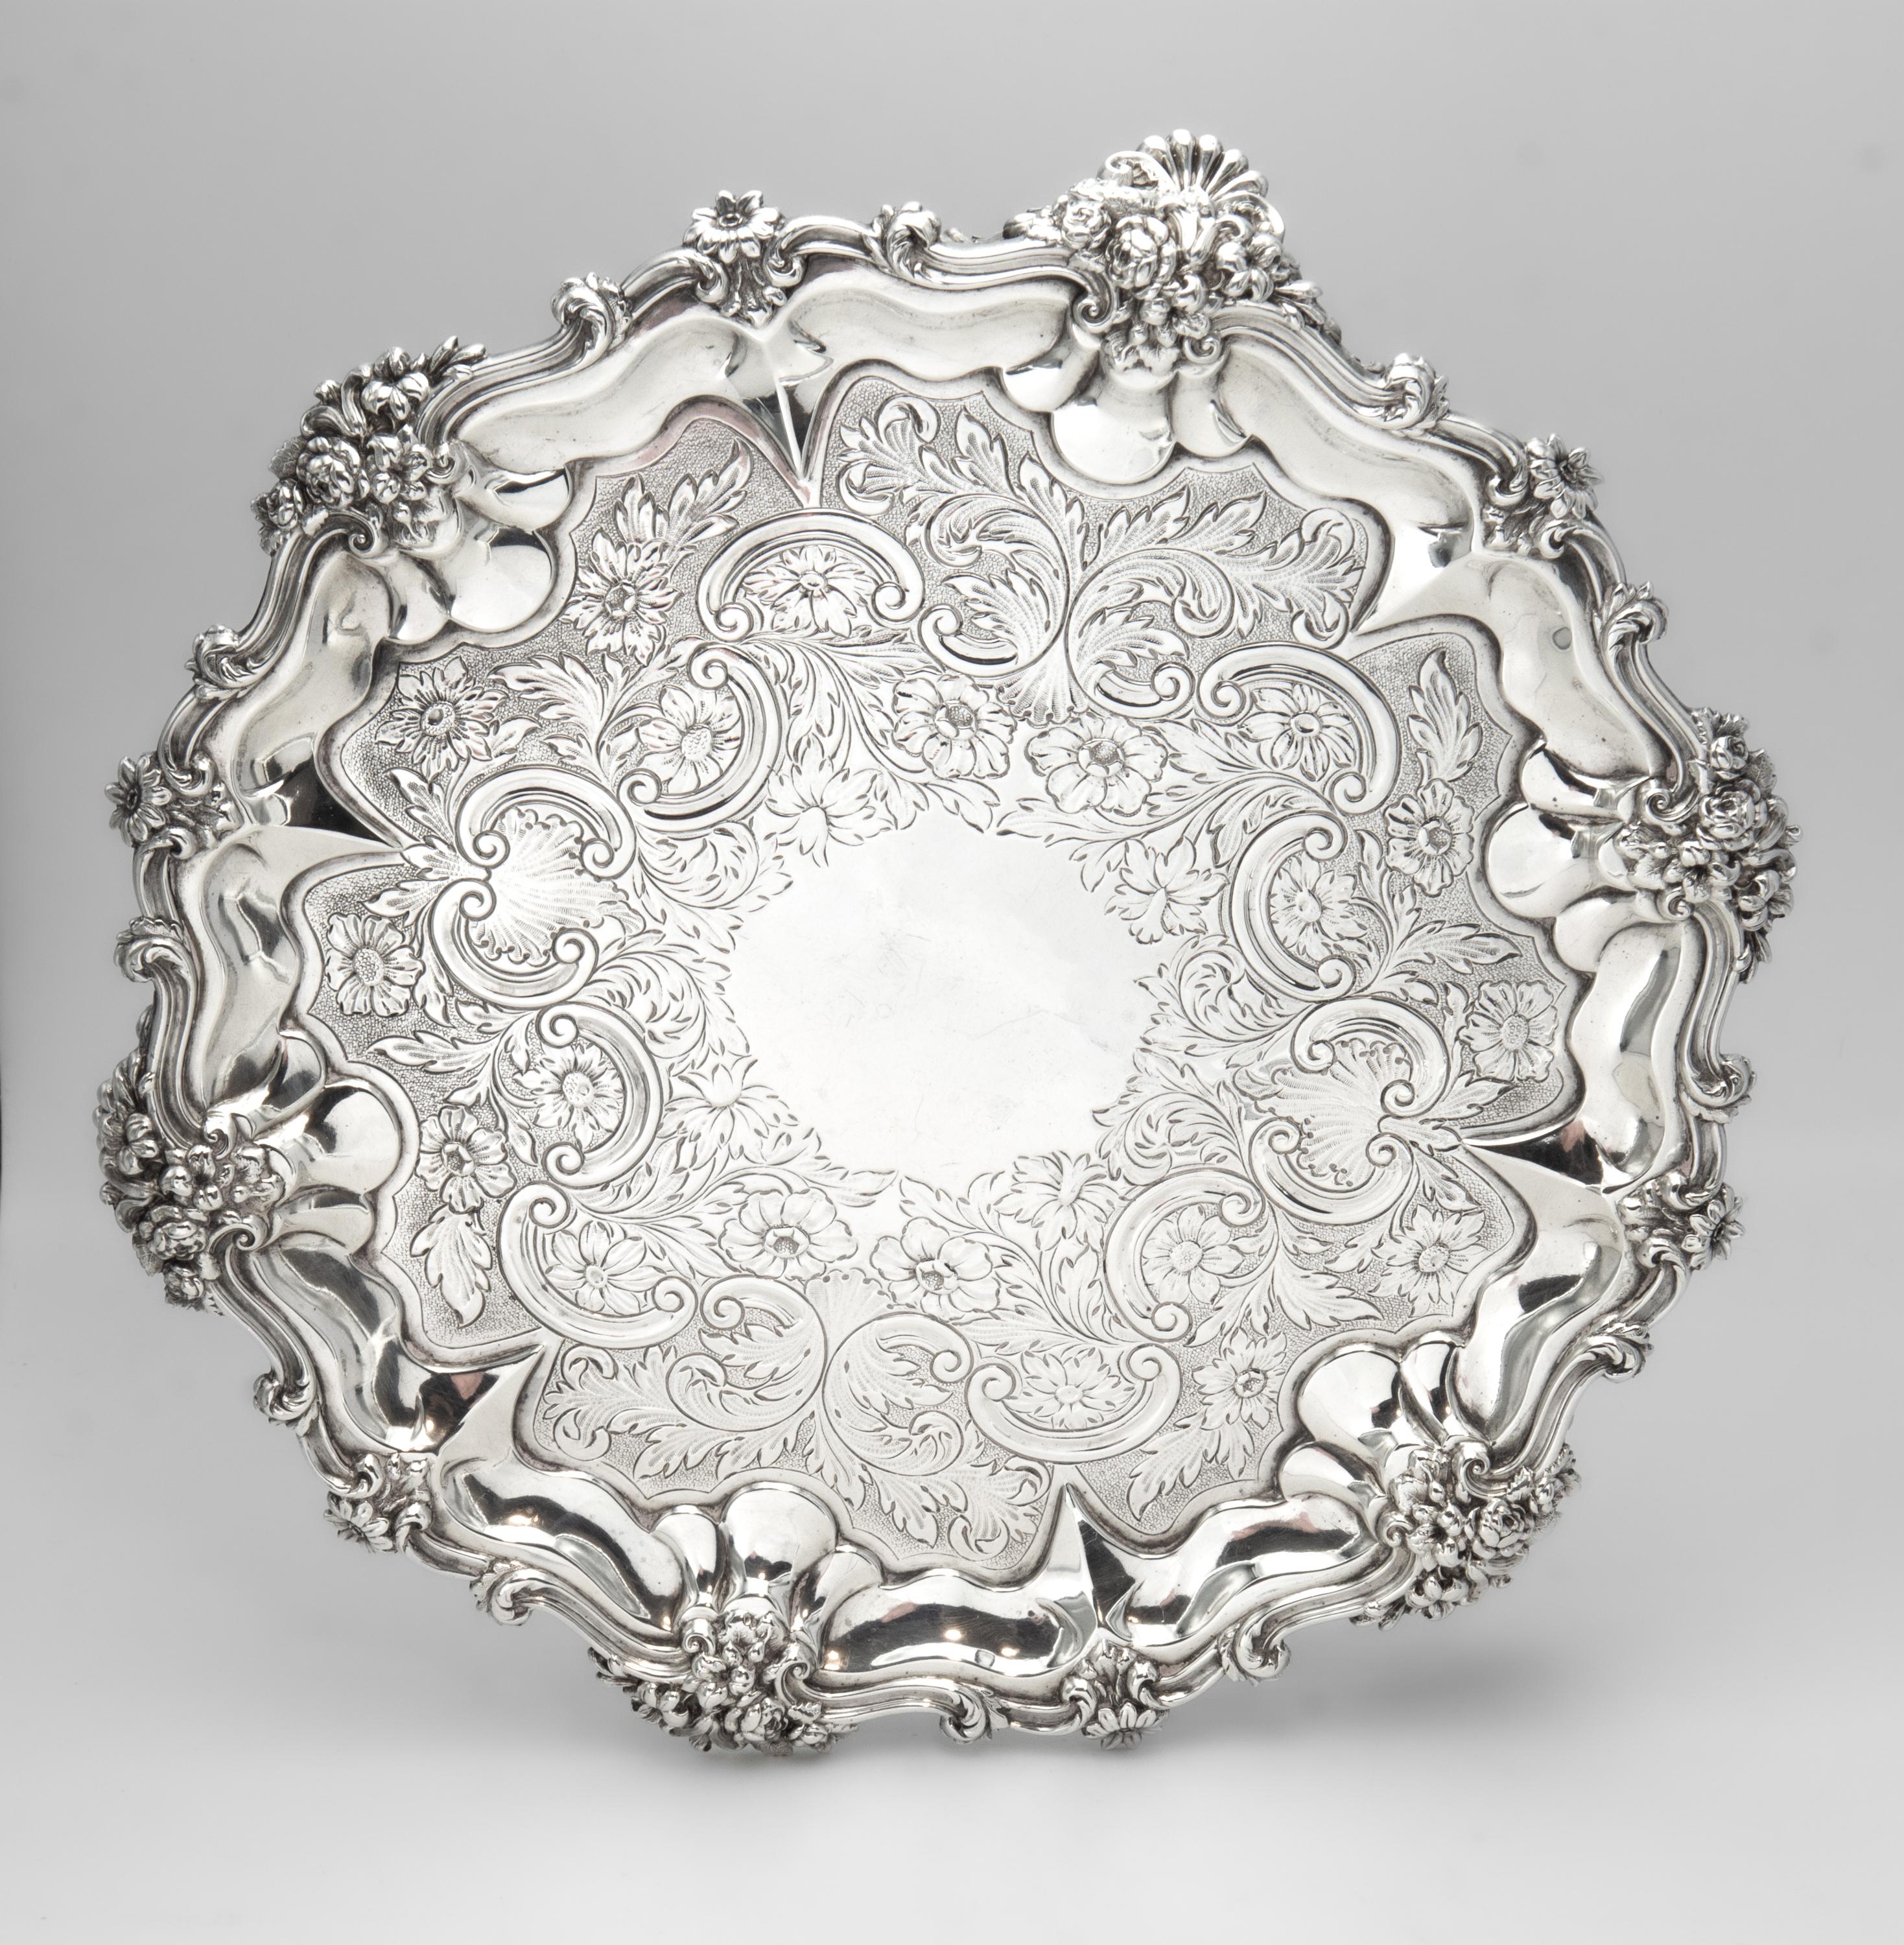 Antique William IV sterling silver flat-chased waiter, hallmarked London, 1831, by makers Edward, Edward Jr, John and W. Barnard.

The decorative waiter has a scroll and foliate cast rim with alternating flowers against rocaille, standing on cast